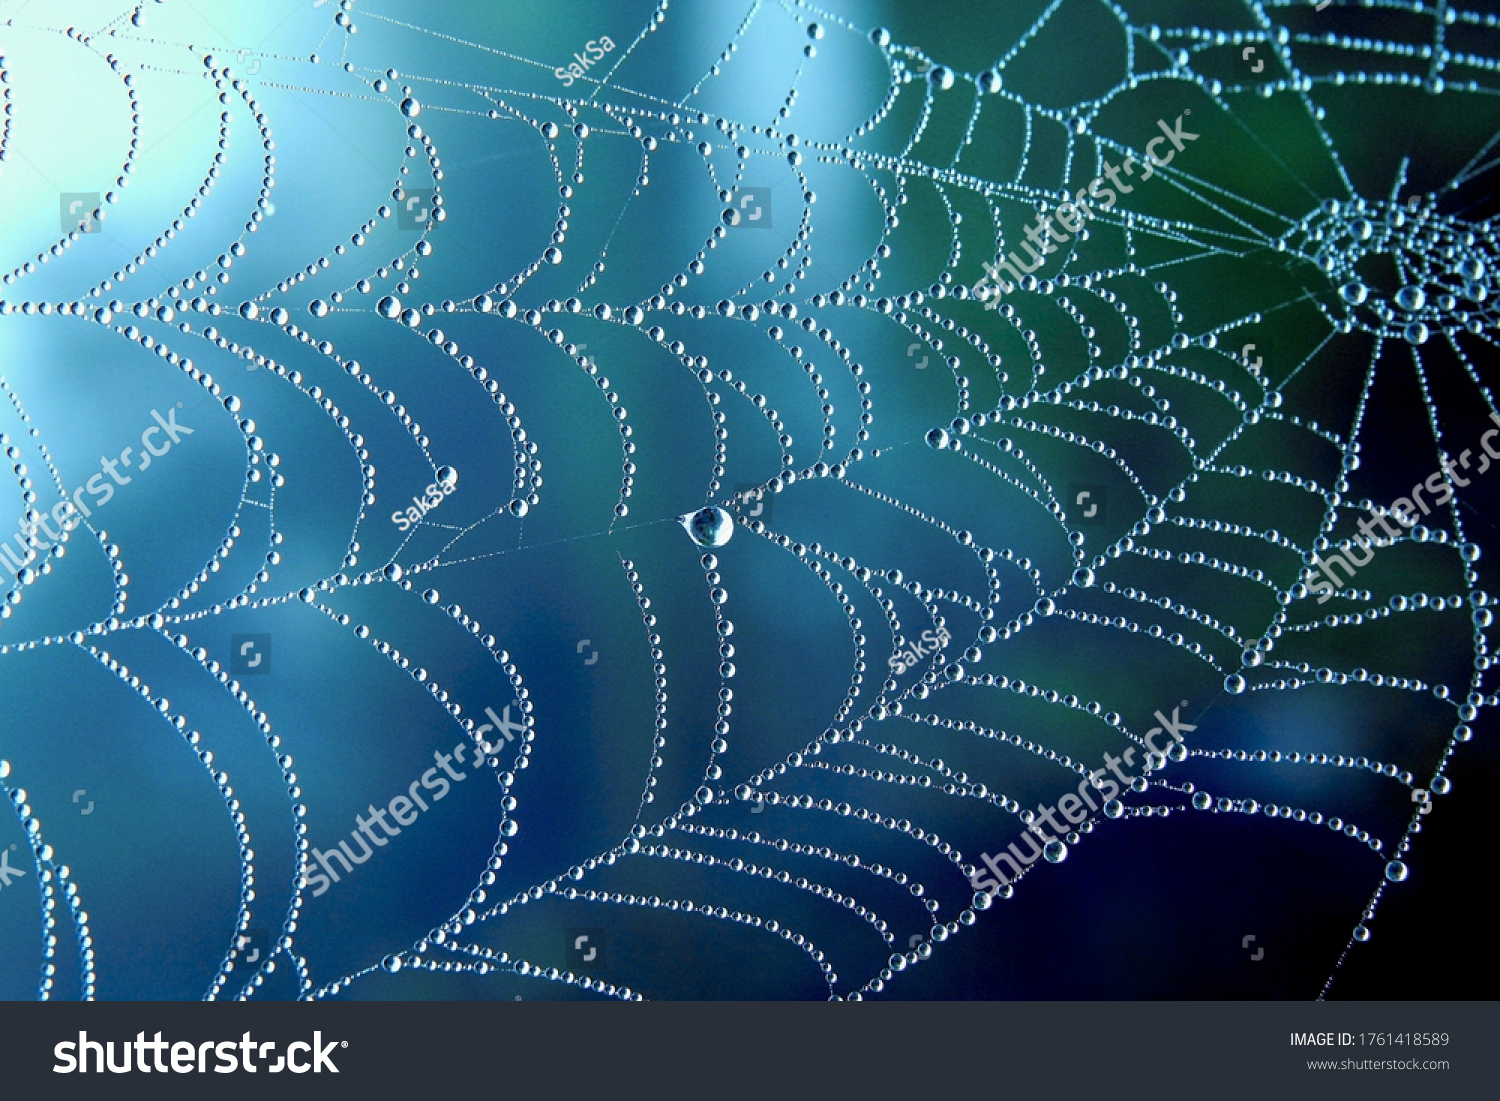 Cobweb or spiderweb natural rain pattern background close-up. Cobweb with drops of rain pattern in blue light. Cobweb net texture with morning rain bokeh. Partial blur view lines spider web necklace #1761418589